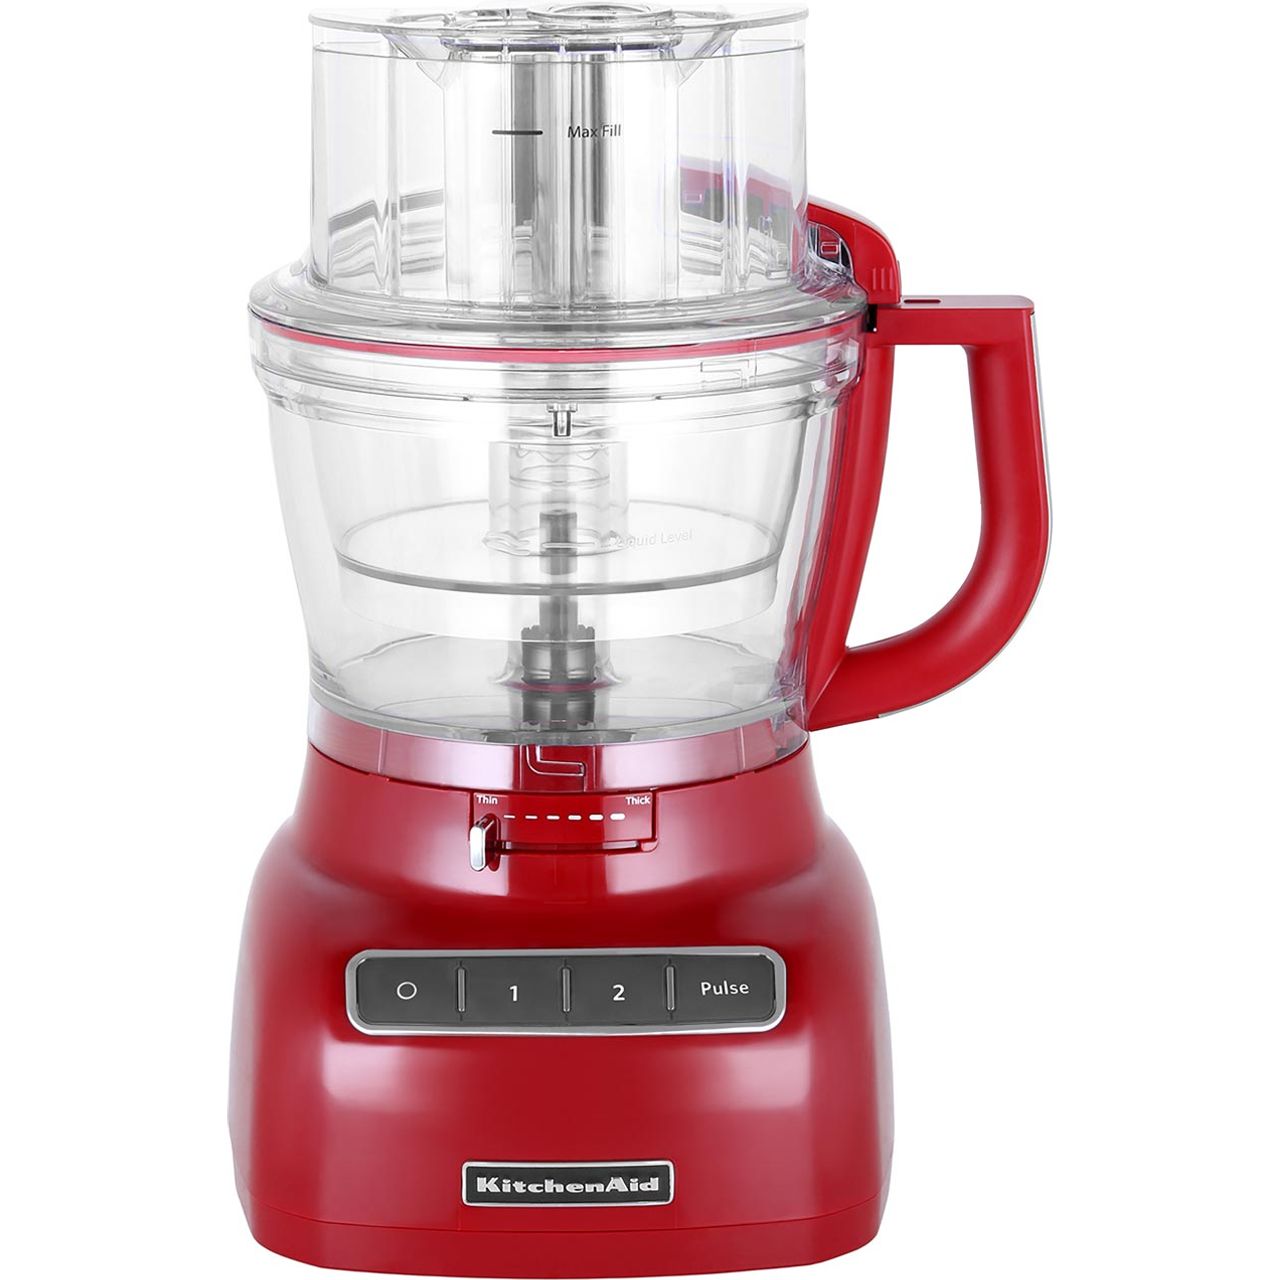 KitchenAid 5KFP1335BER 3.1 Litre Food Processor With 4 Accessories Review